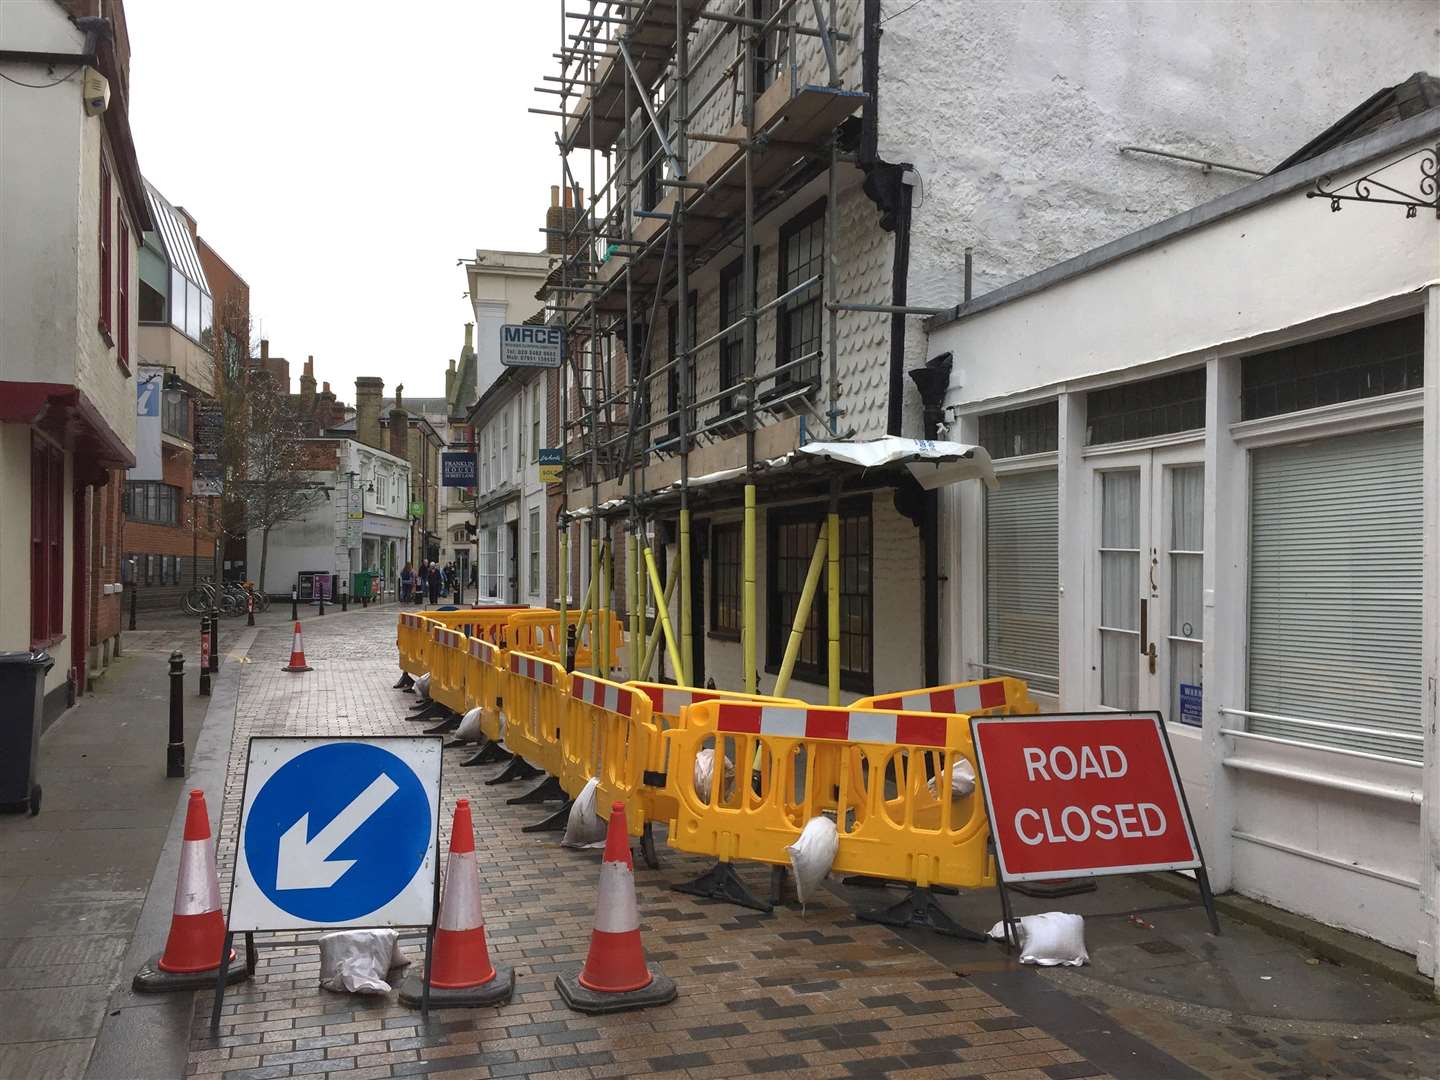 Highway bosses have issued a road closure notice that Best Lane, off Canterbury High Street, is shut to traffic